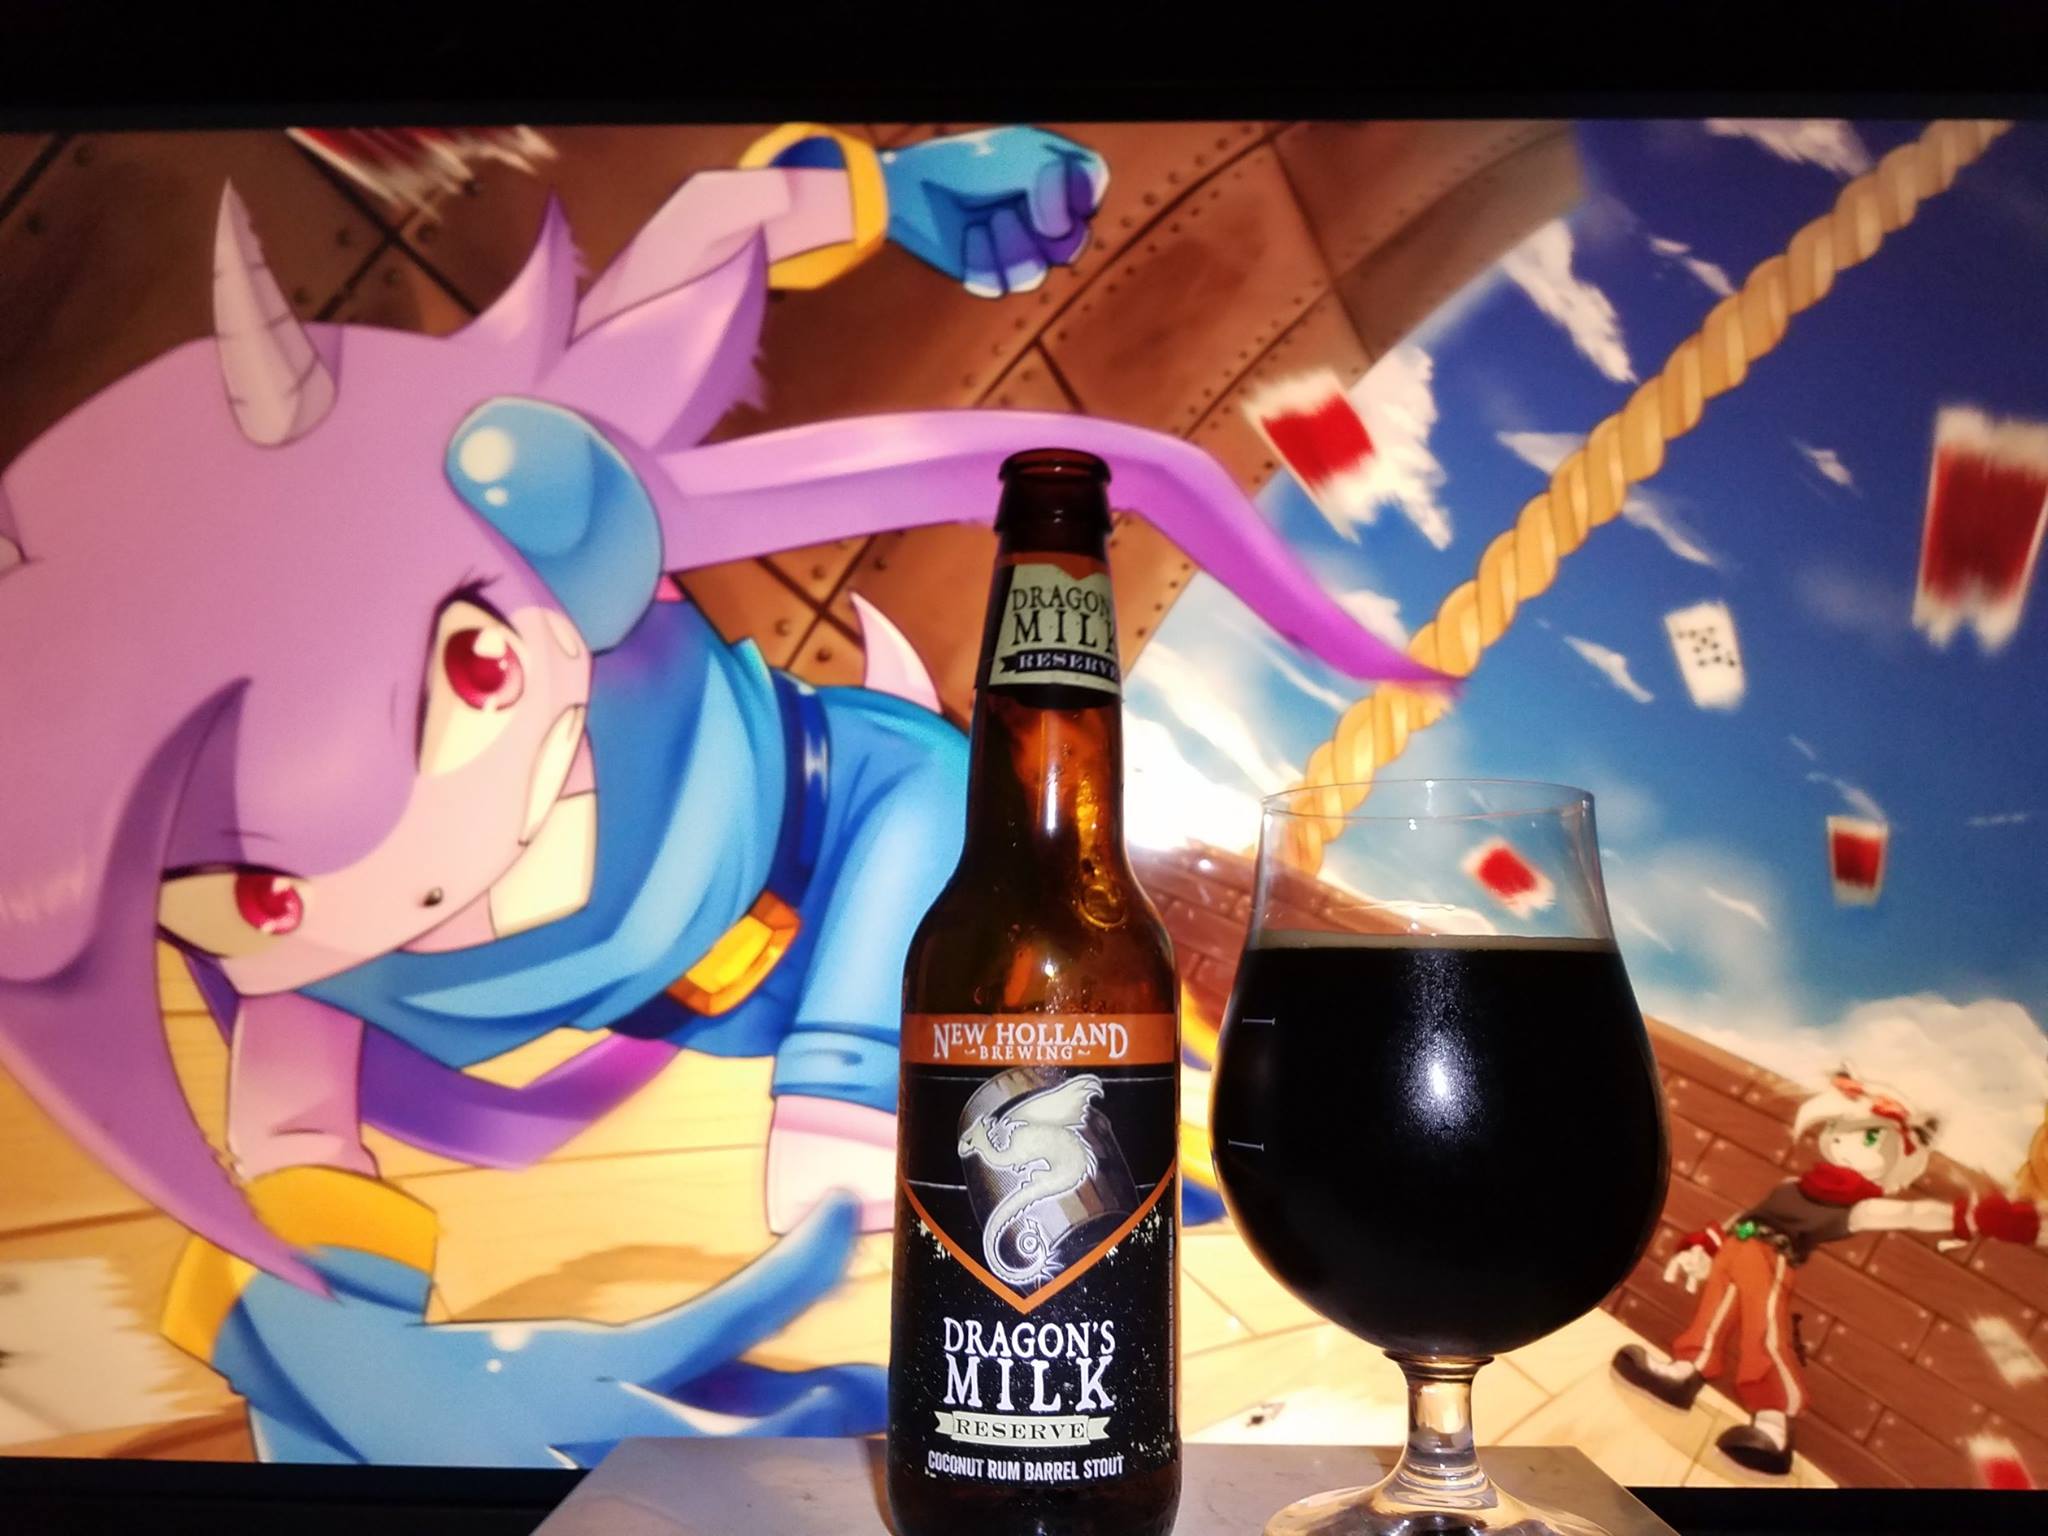 Dragon S Milk Reserve Coconut Rum Barrel Stout By New Holland Brewing Brewerianimelogs Anime And Beer Lore